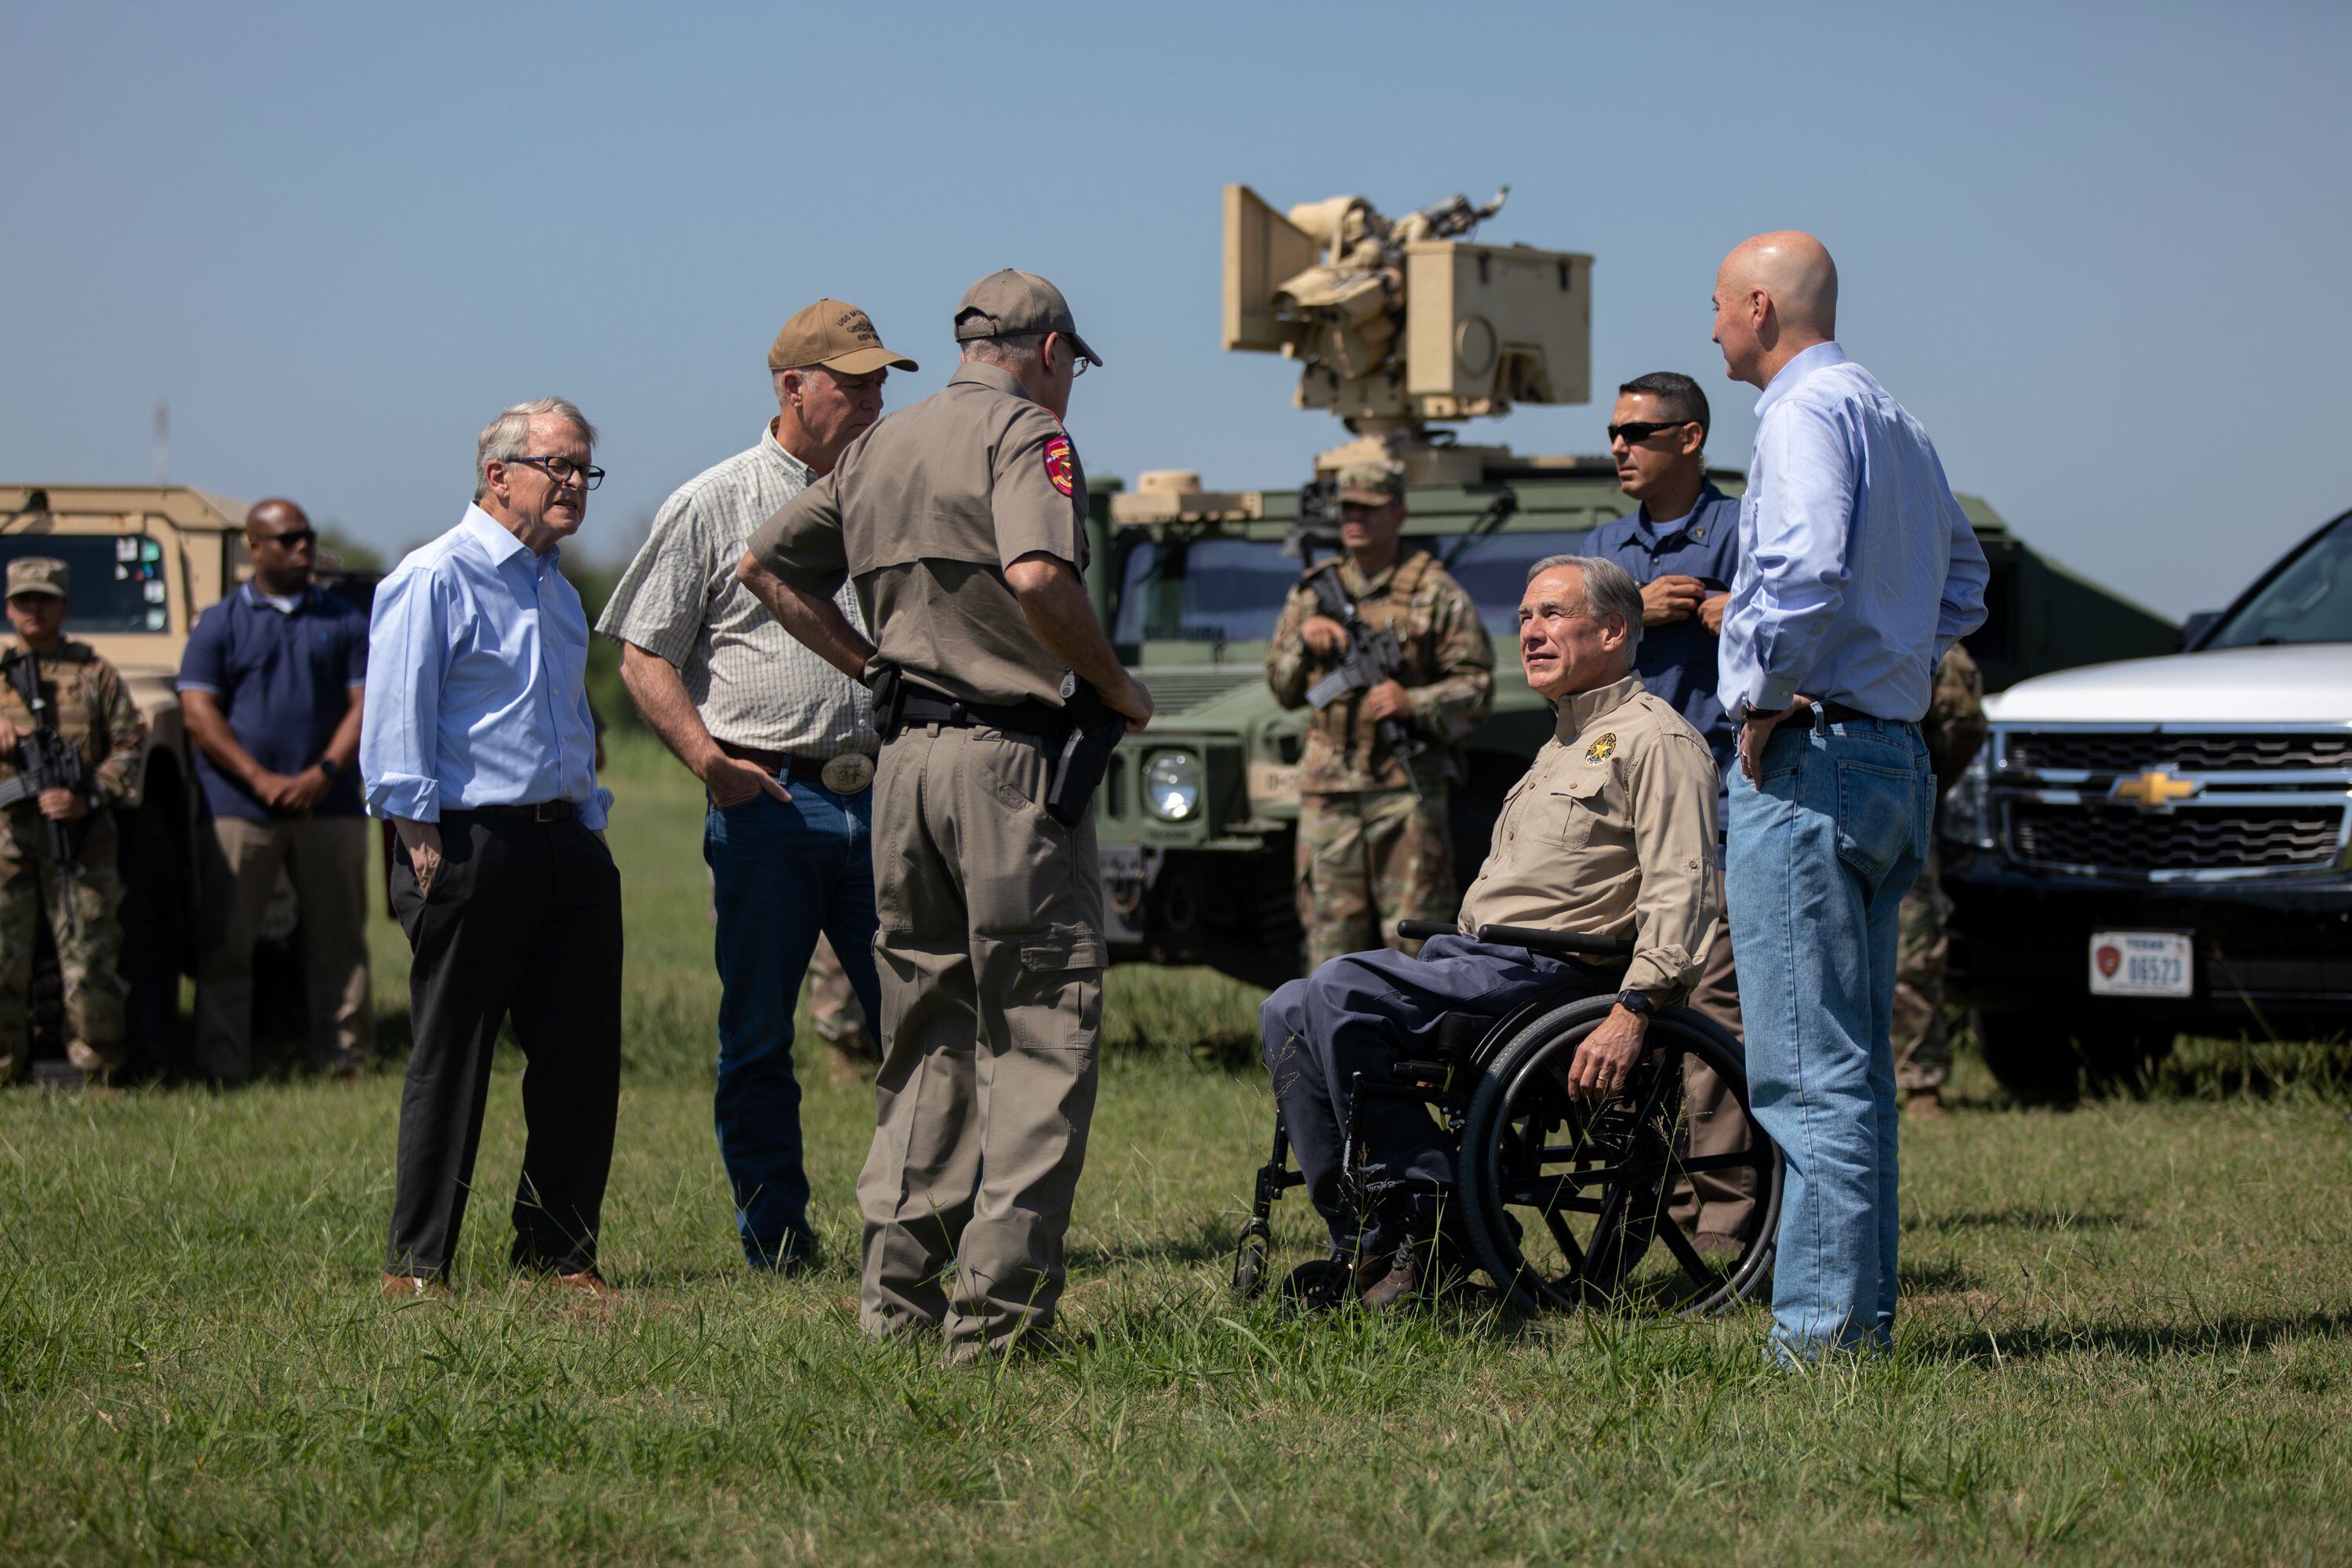 Flanked by National Guard members, Gov. Greg Abbott speaks with Texas Department of Public Safety Director Steve McCraw prior to a press conference with nine other governors at Anzalduas Park in Mission on Oct. 6, 2021. (Eddie Gaspar/The Texas Tribune)